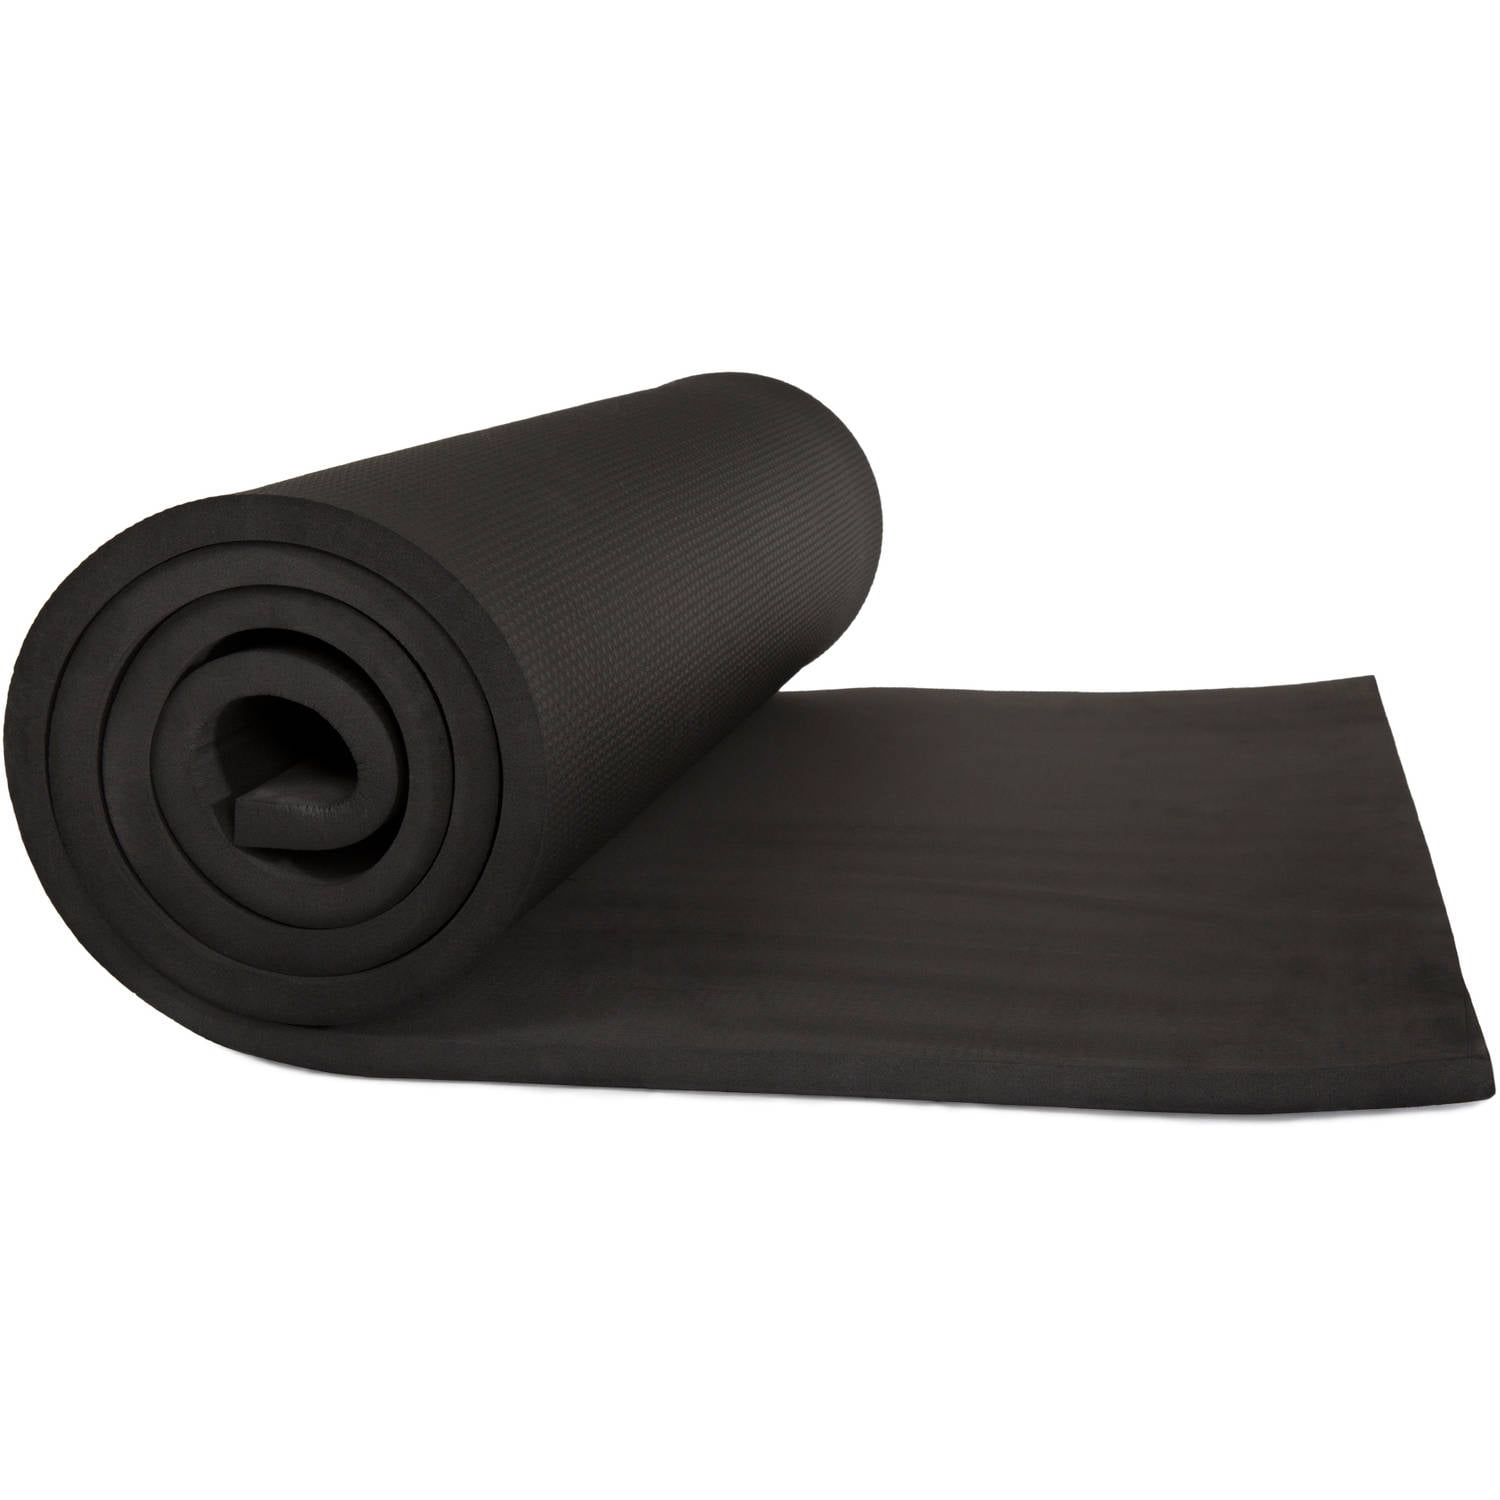 Strauss Extra Thick Yoga Mat for men & Women with Carry Strap